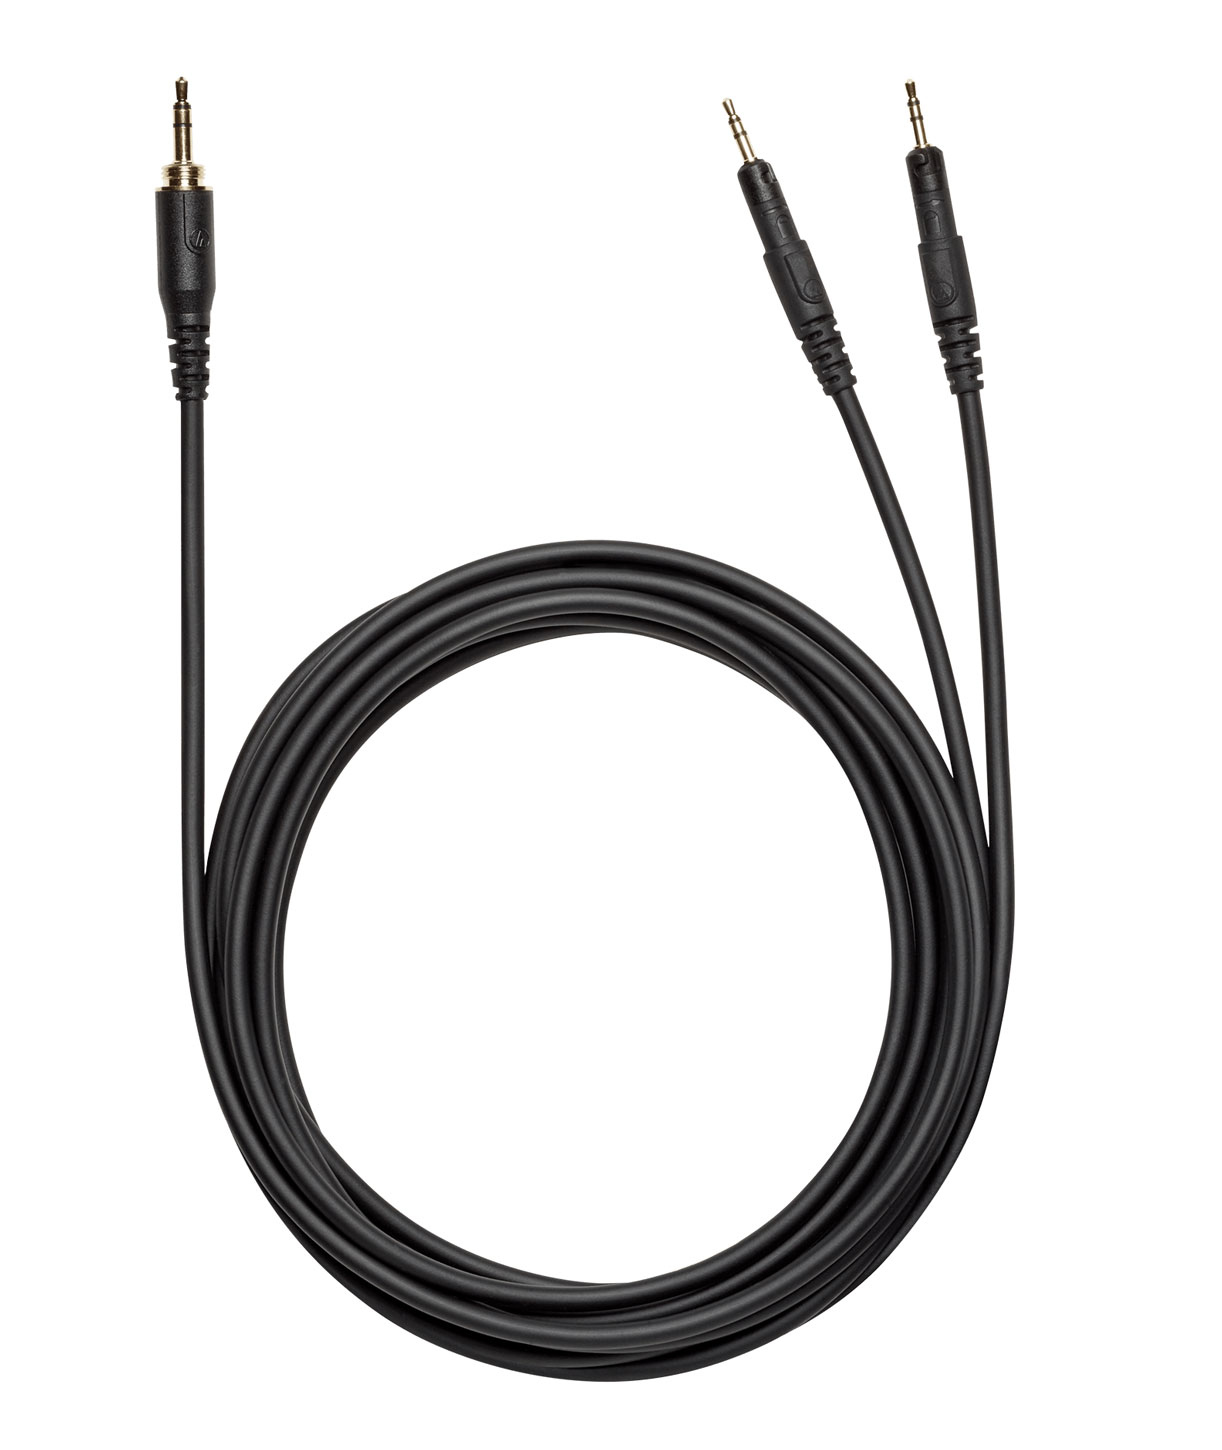 ATH-R70X  Cable  